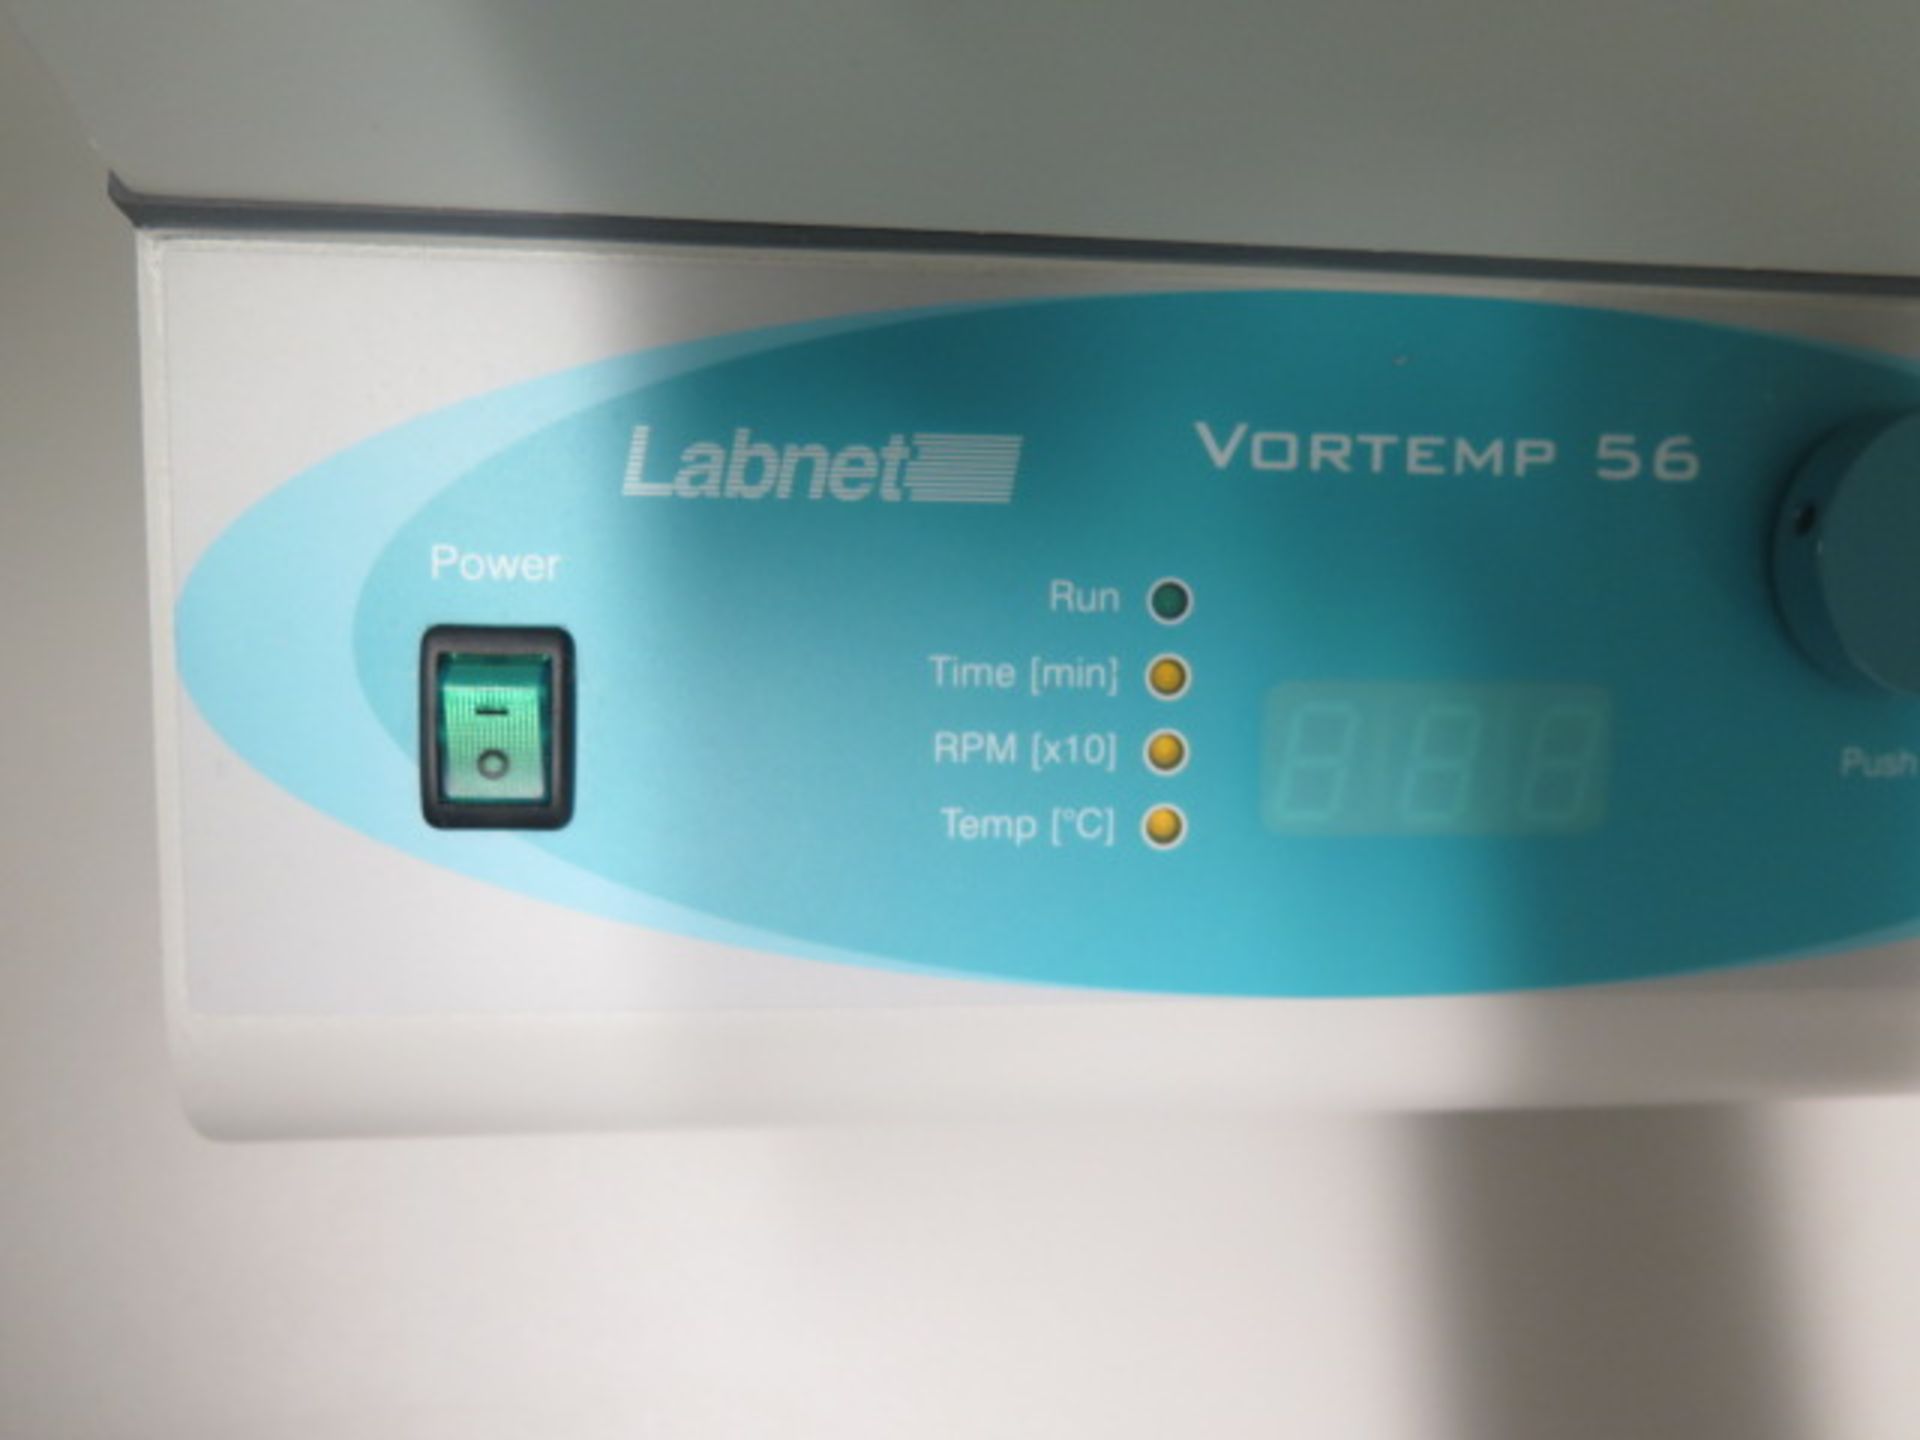 Labnet Vortemp 56 mdl. S2056-A Incubator / Shaker s/n 08051809 | Loading Price: Hand Carry or - Image 4 of 5